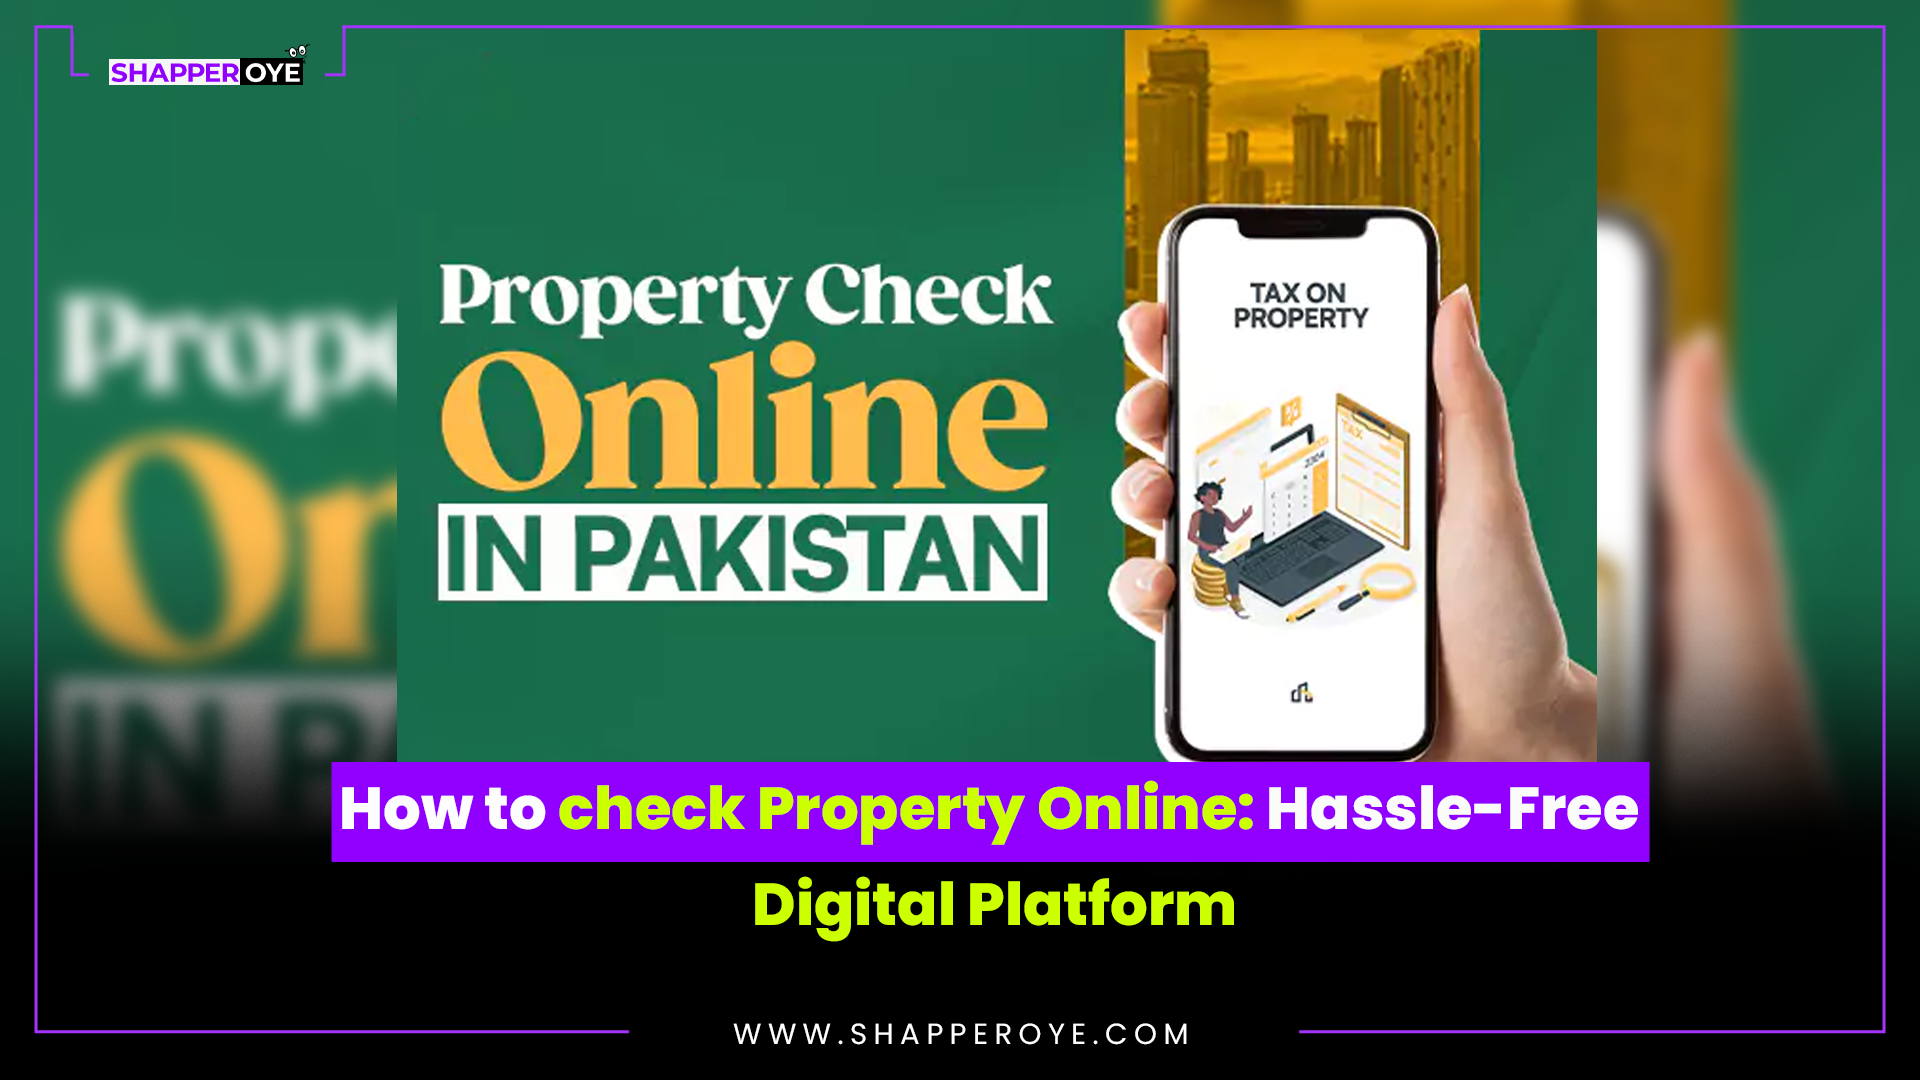 How to check Property Online